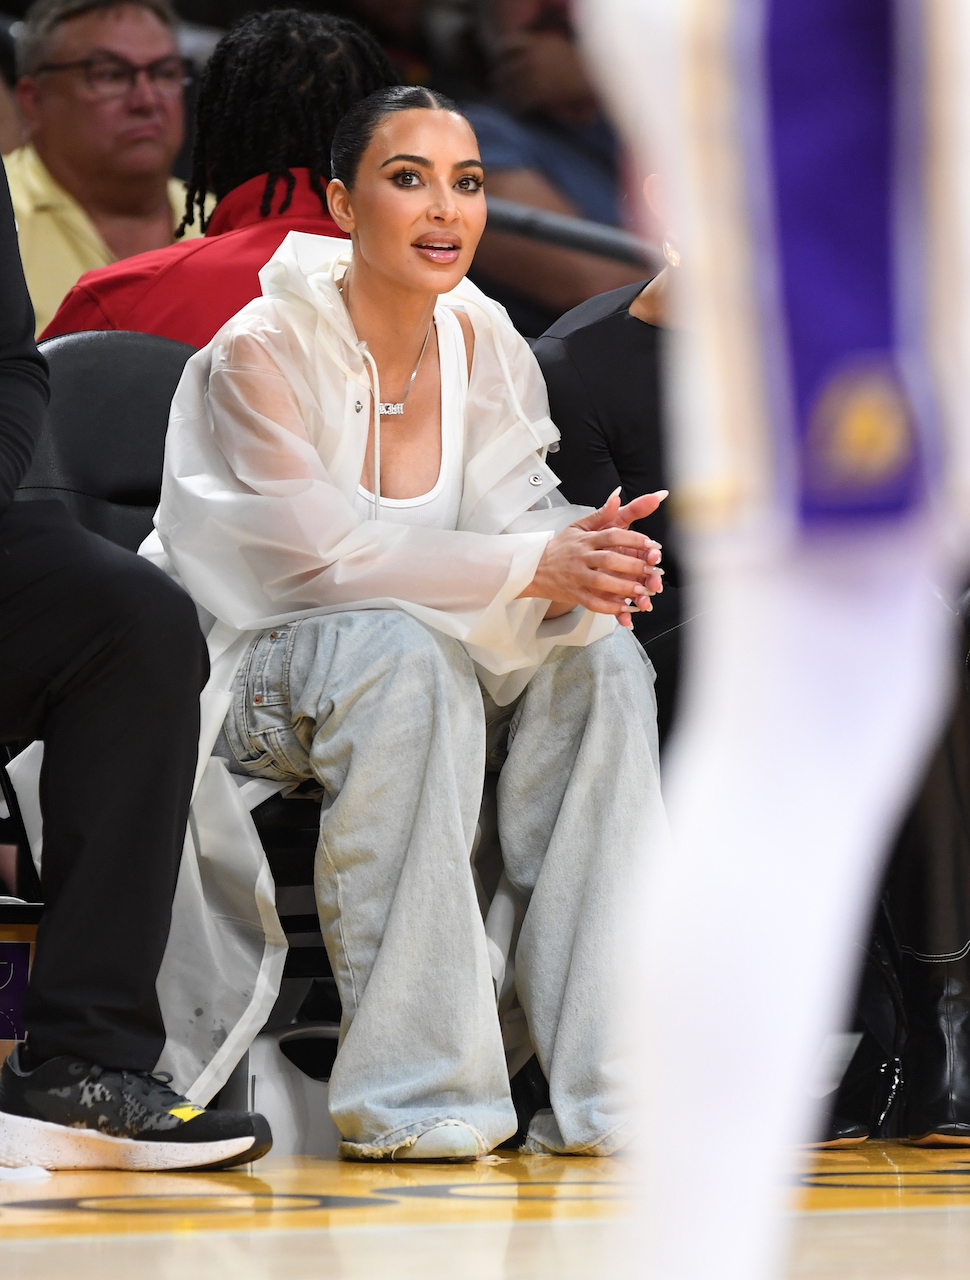 Kim Baggy Jeans to 2 Lakers Games